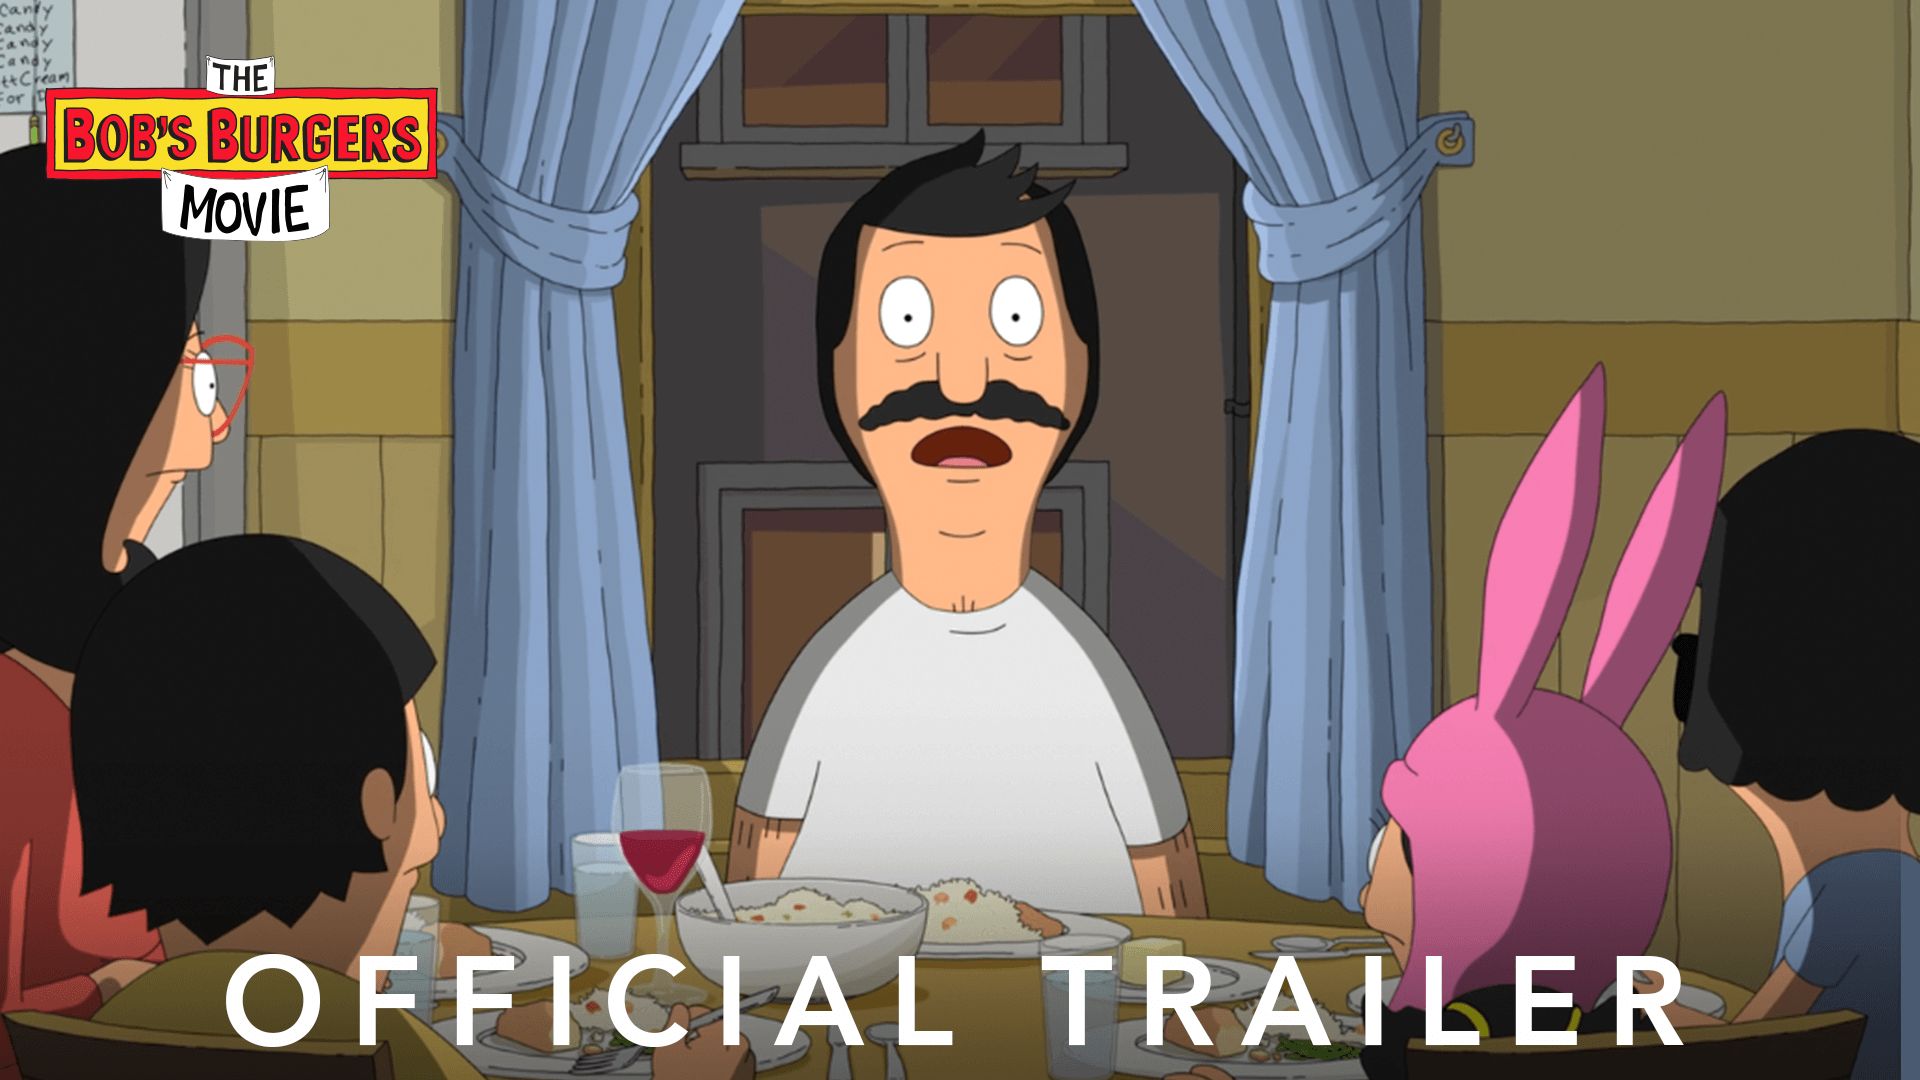 THE BOB'S BURGERS MOVIE: OFFICIAL TRAILER